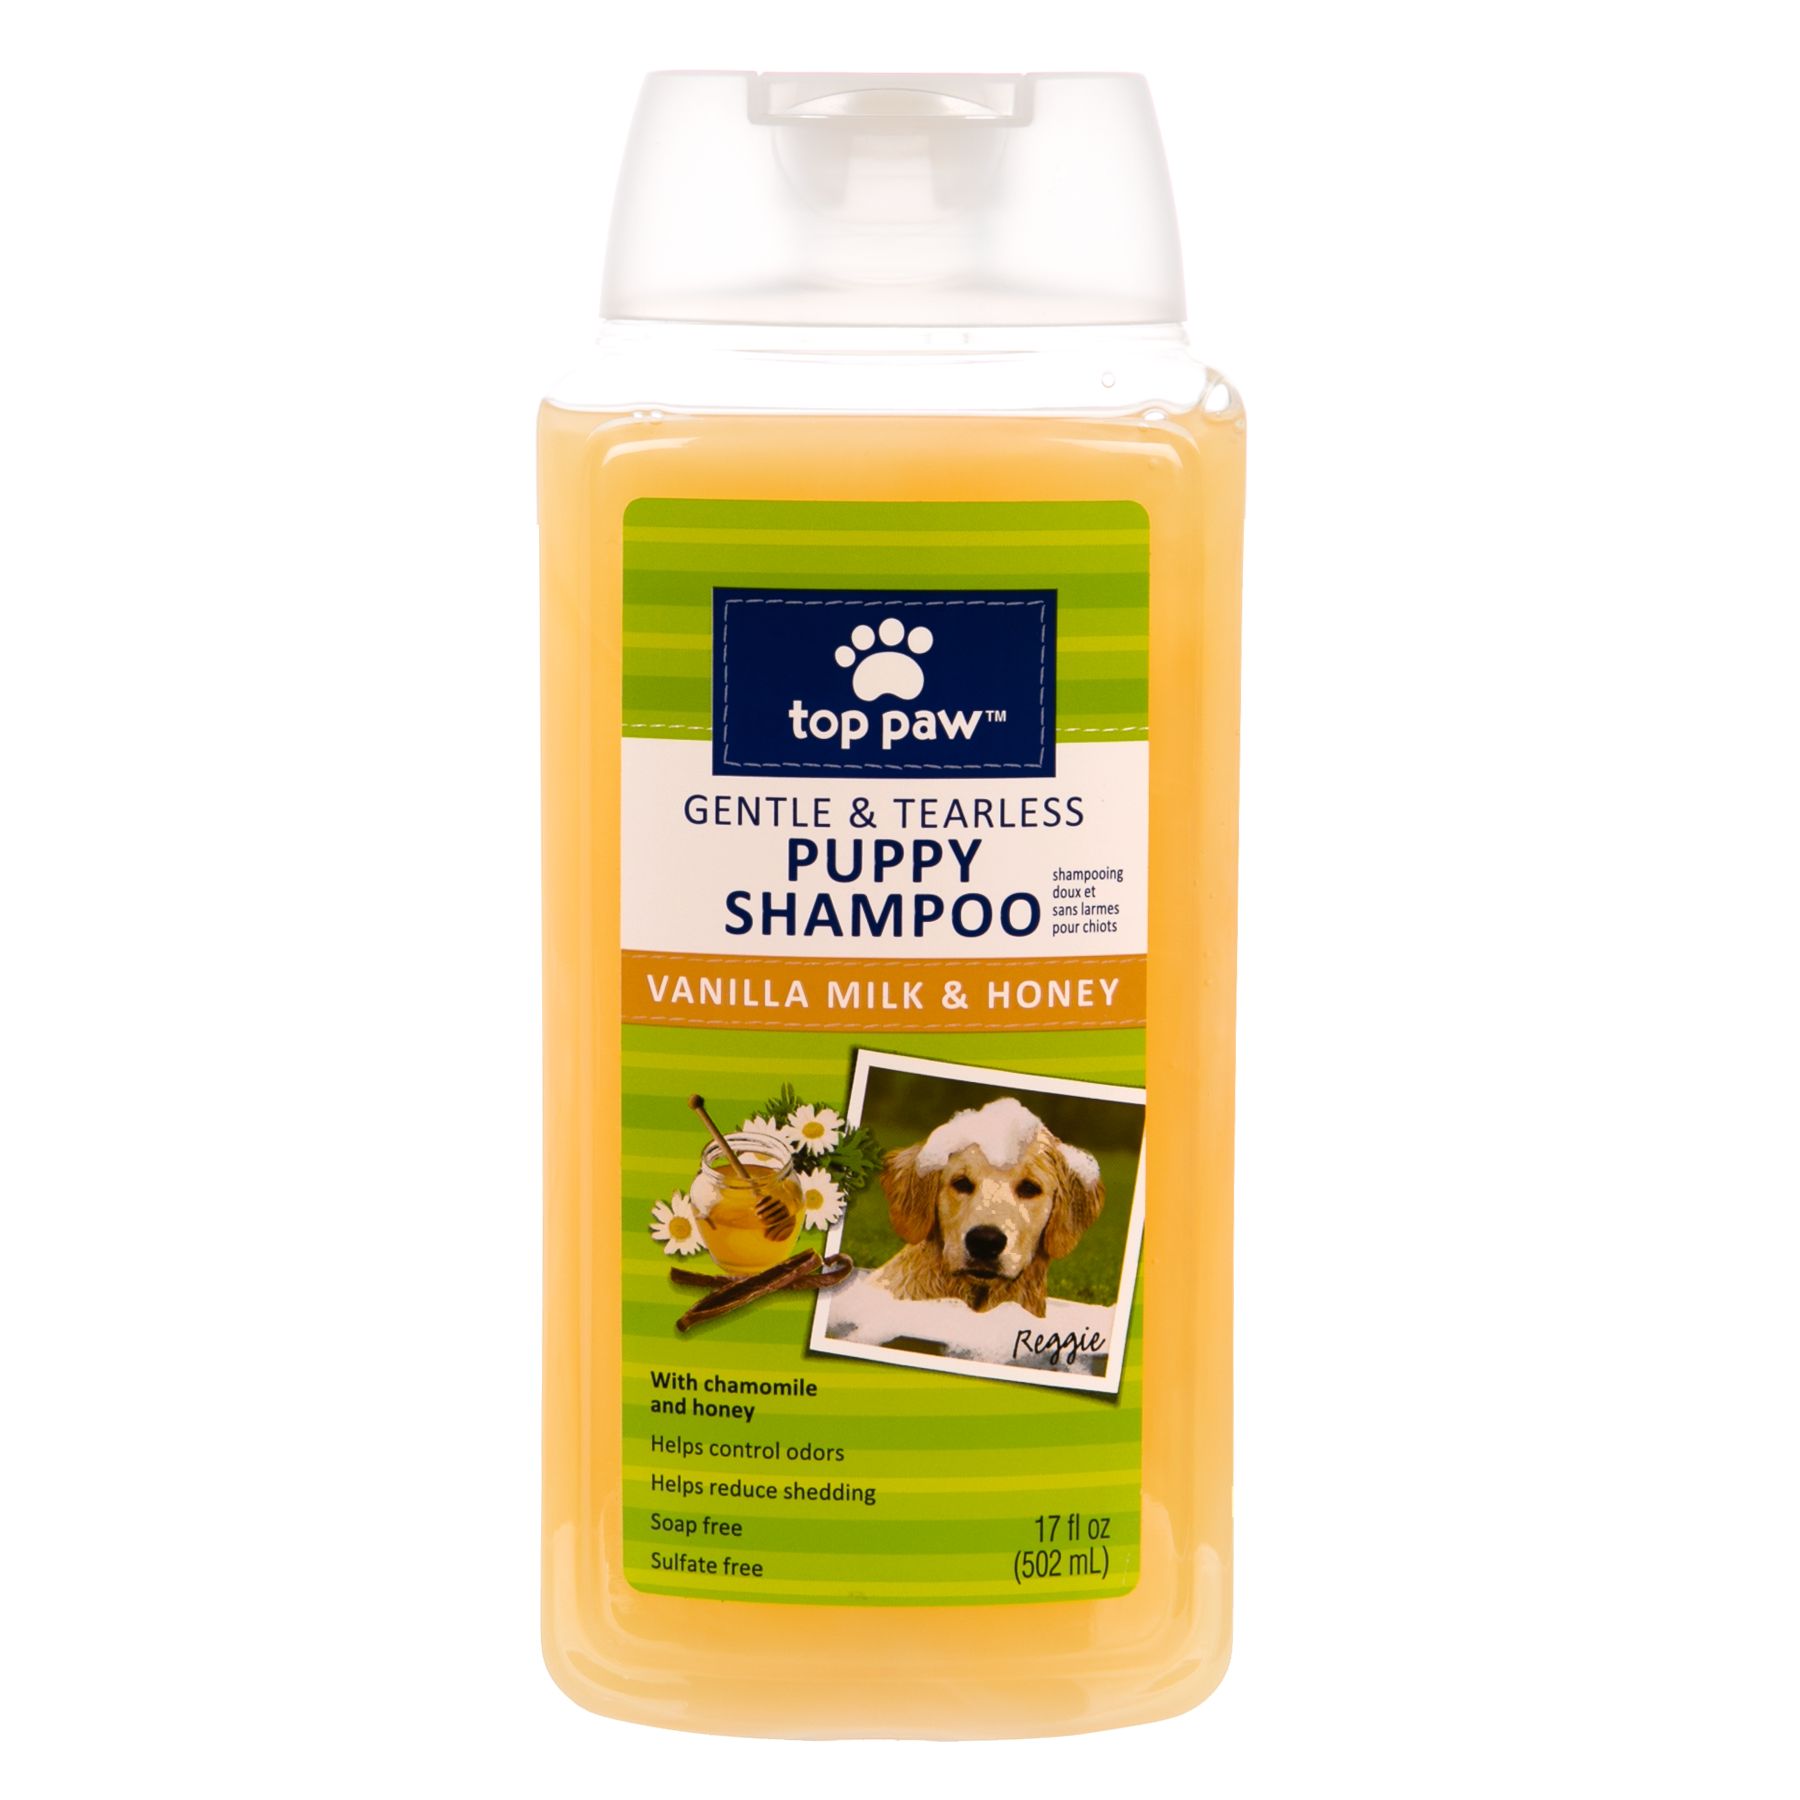 Paw® Gentle and Tearless Puppy Shampoo 